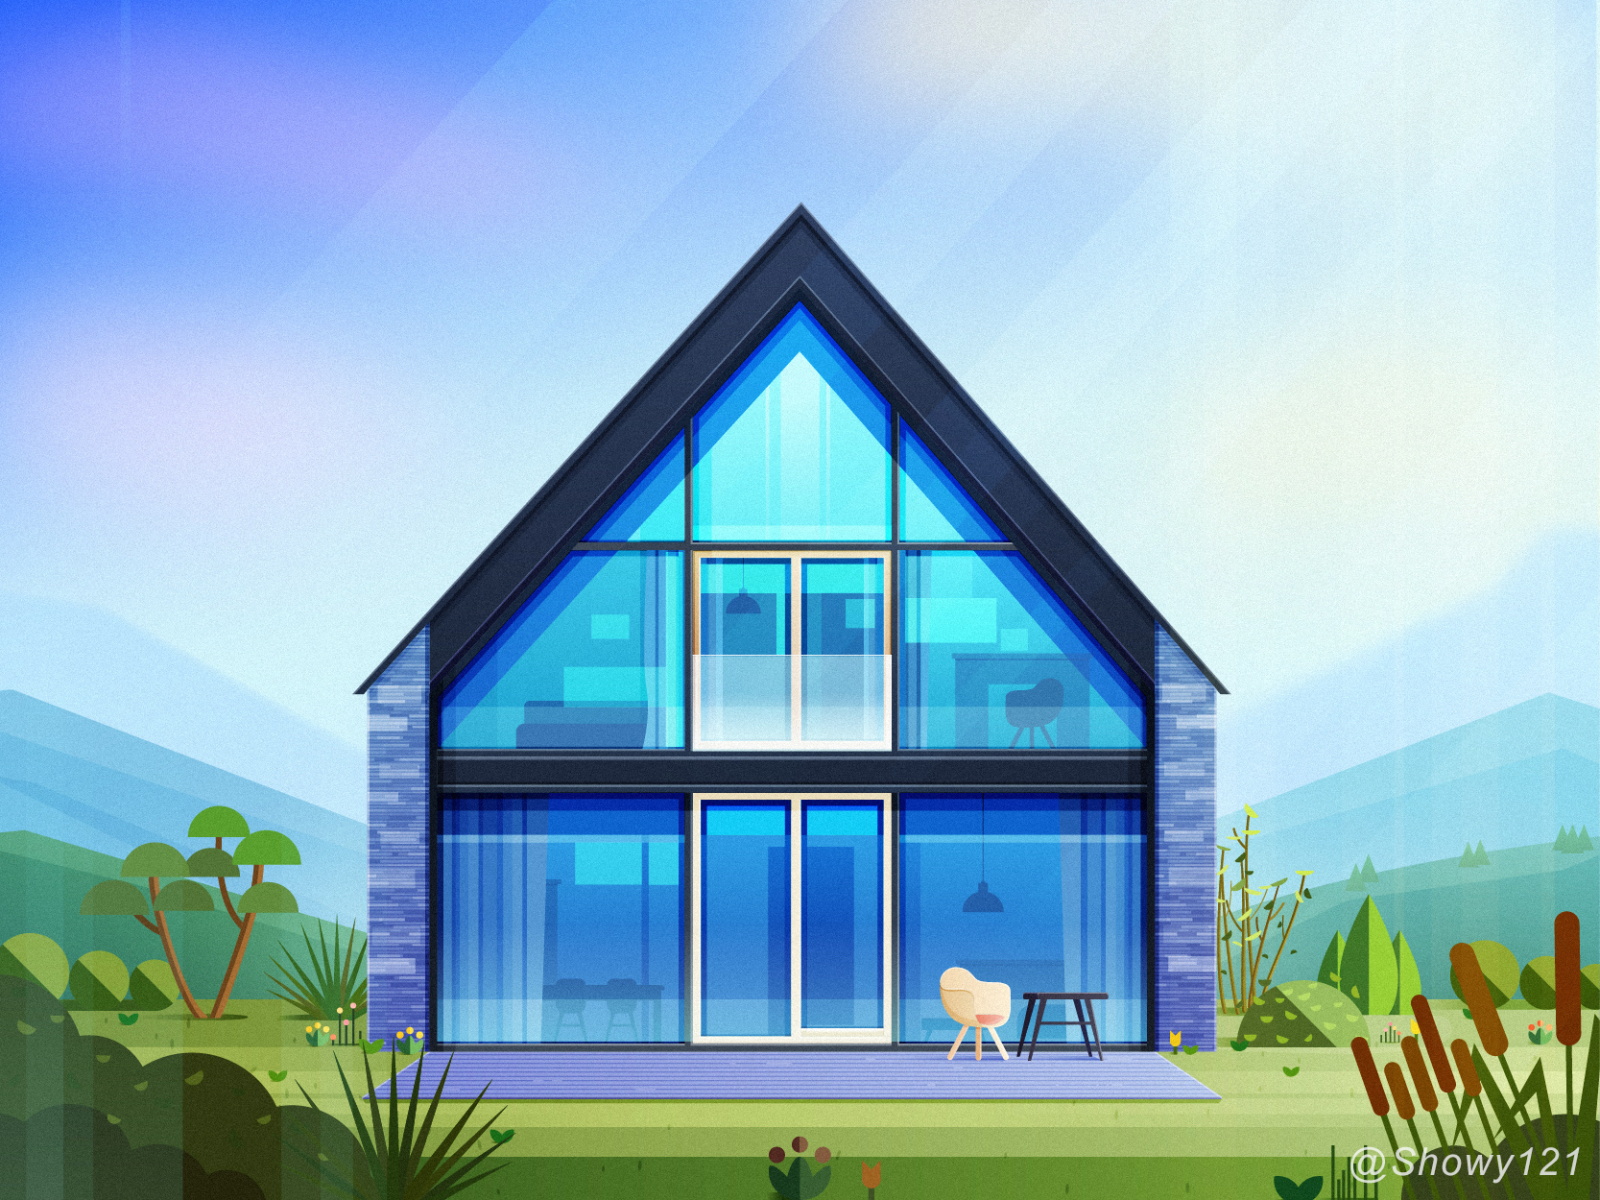 NO.26-Holiday home architecture blue build chair glass house illustration light plant sky windows